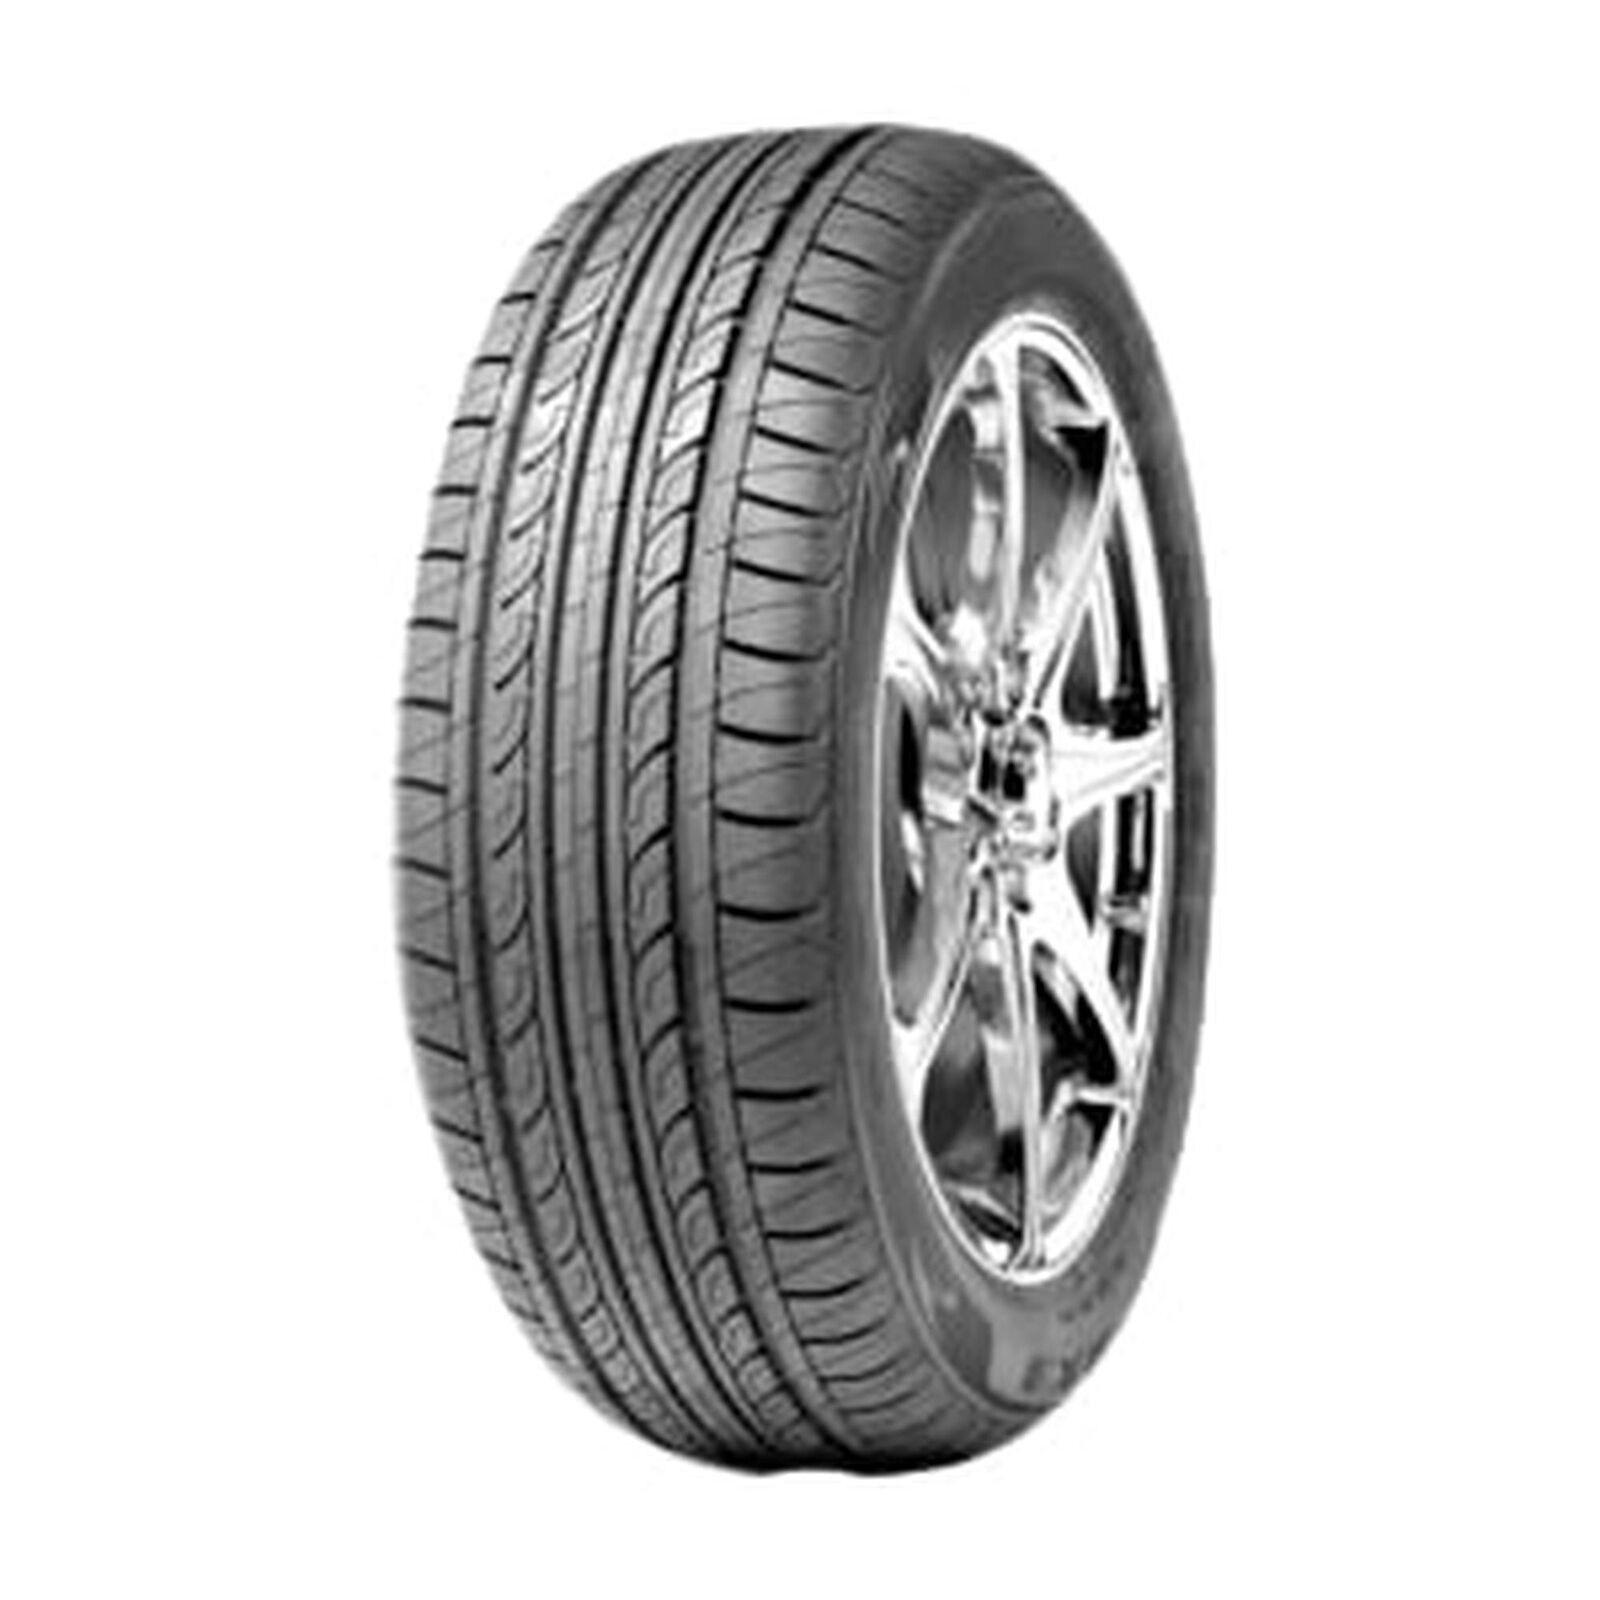 4 New Ardent Hp Rx3  - 195/60r15 Tires 1956015 195 60 15